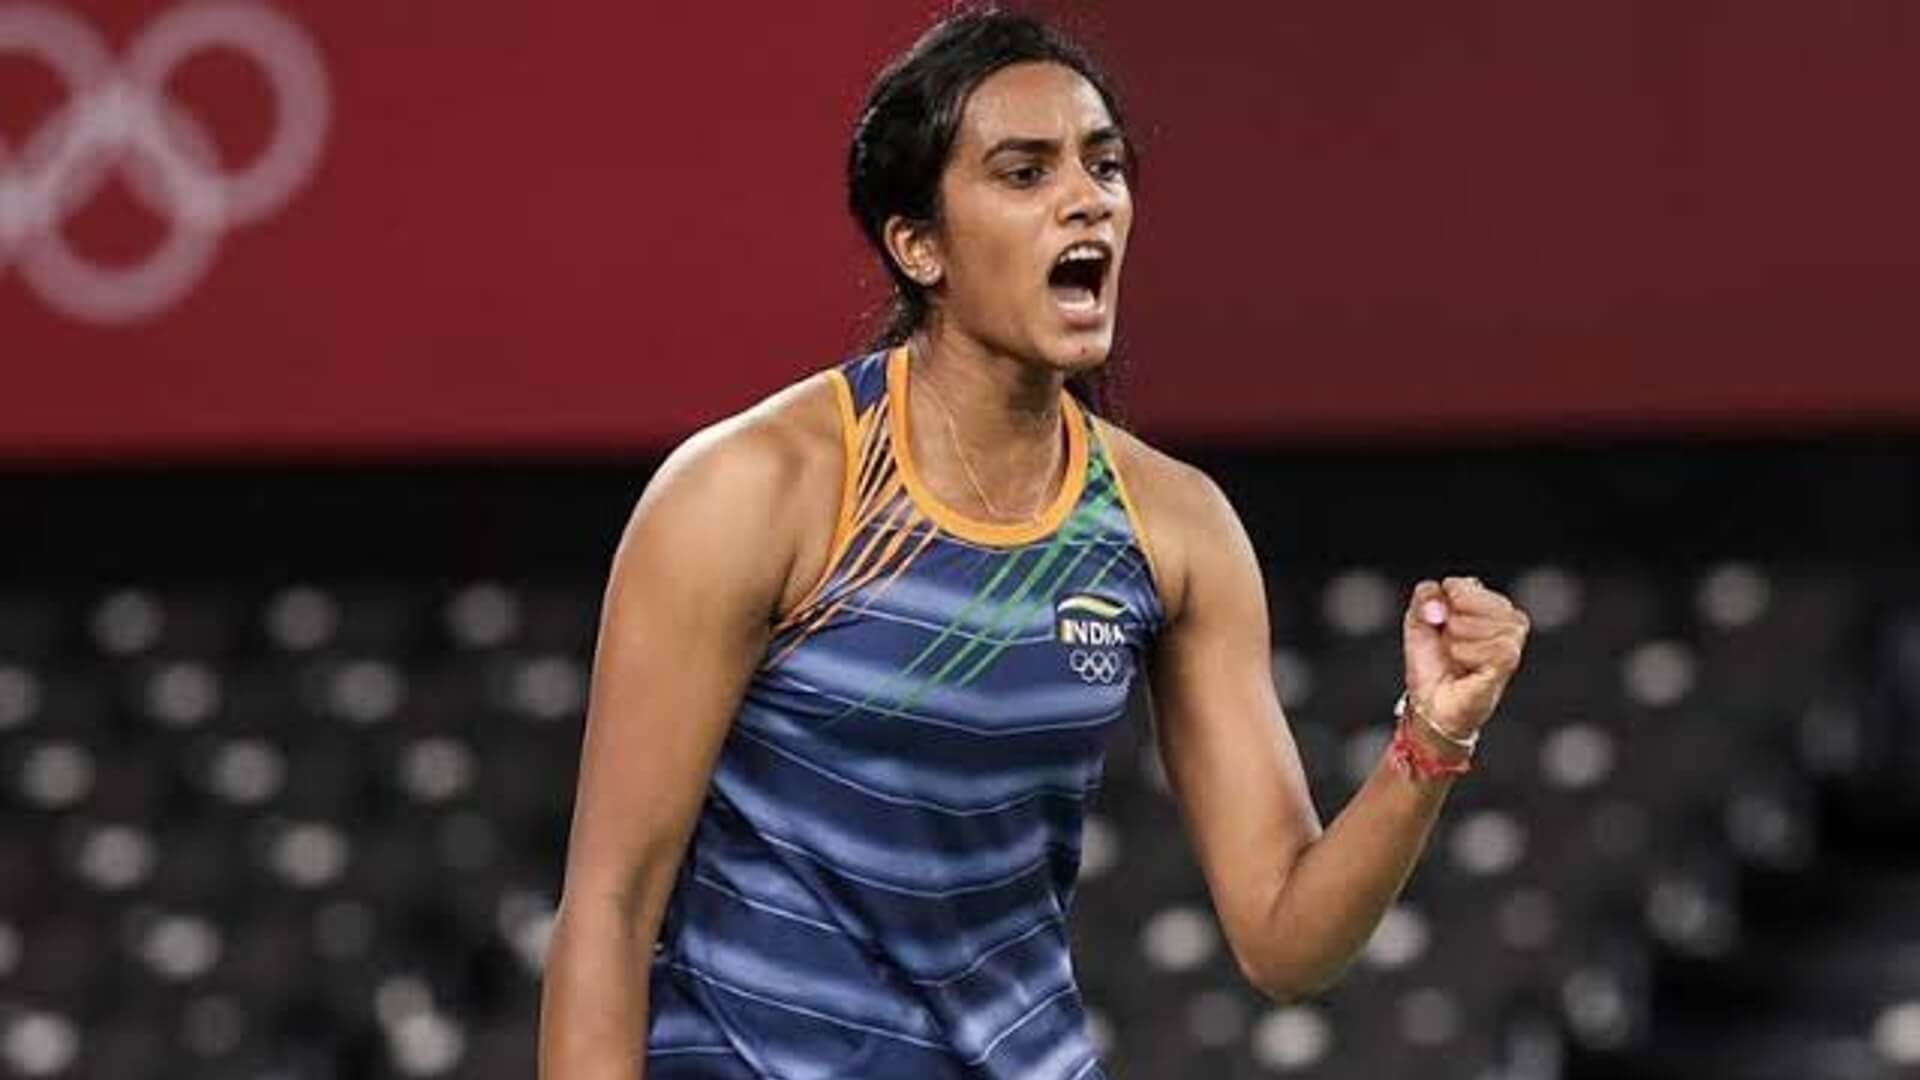 PV Sindhu will come back strongly, says Pullela Gopichand ahead of CWG 2022